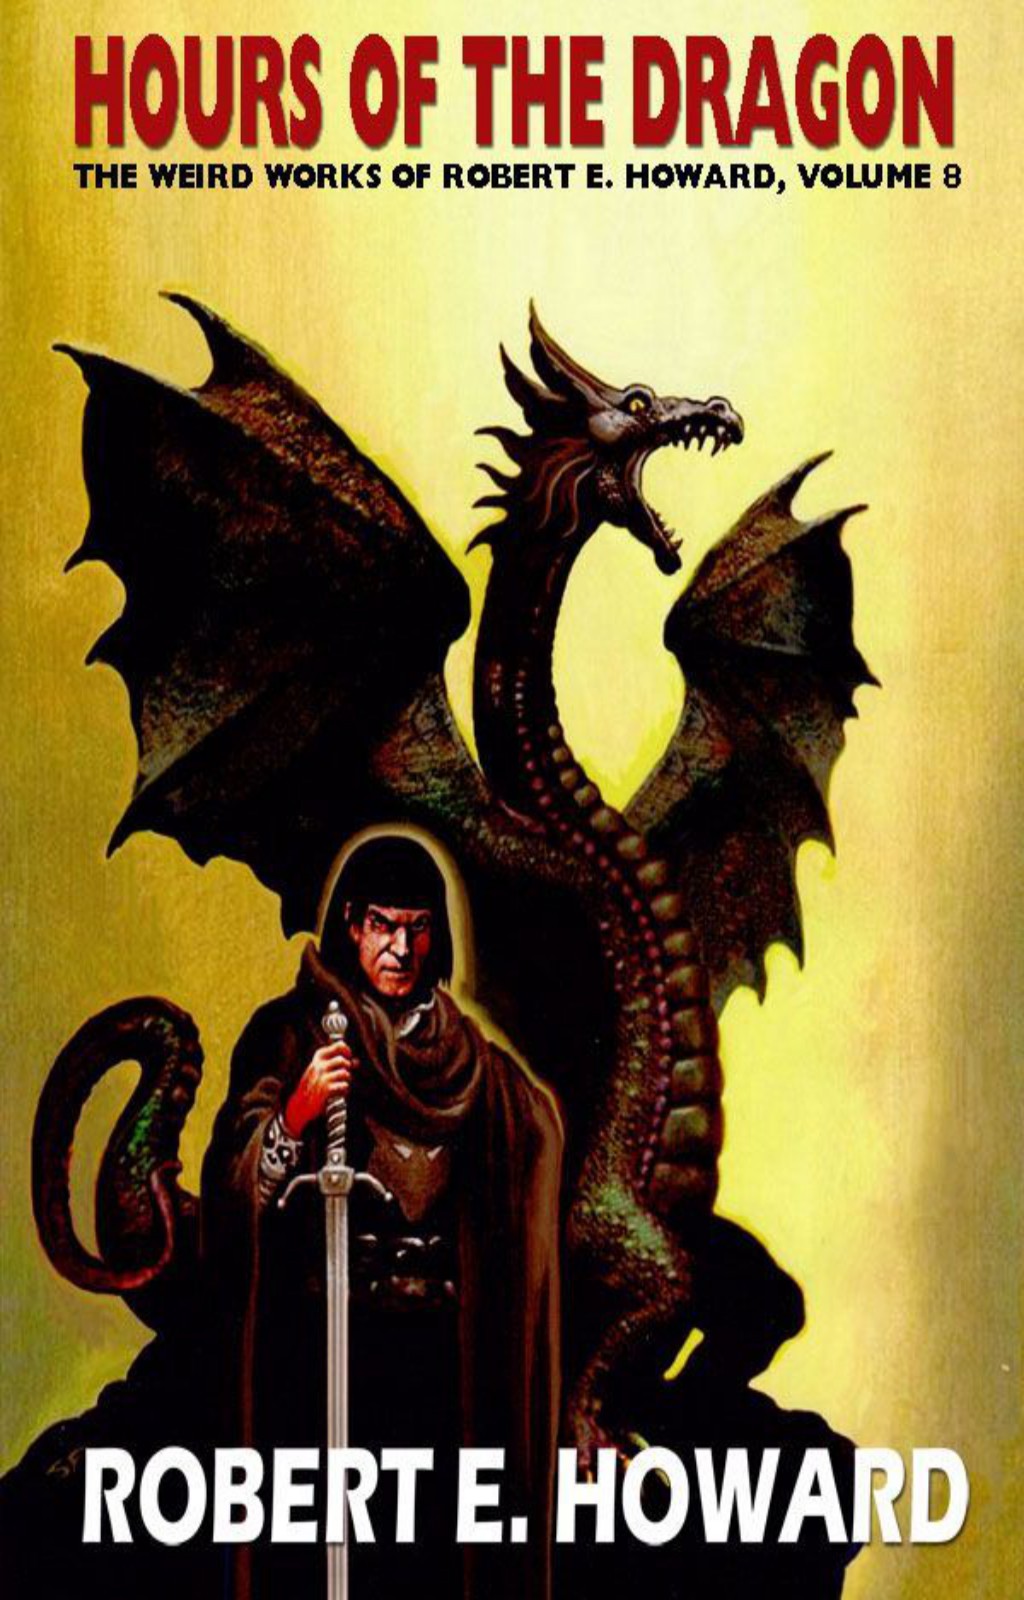 The Hours of the Dragon by Robert E. Howard